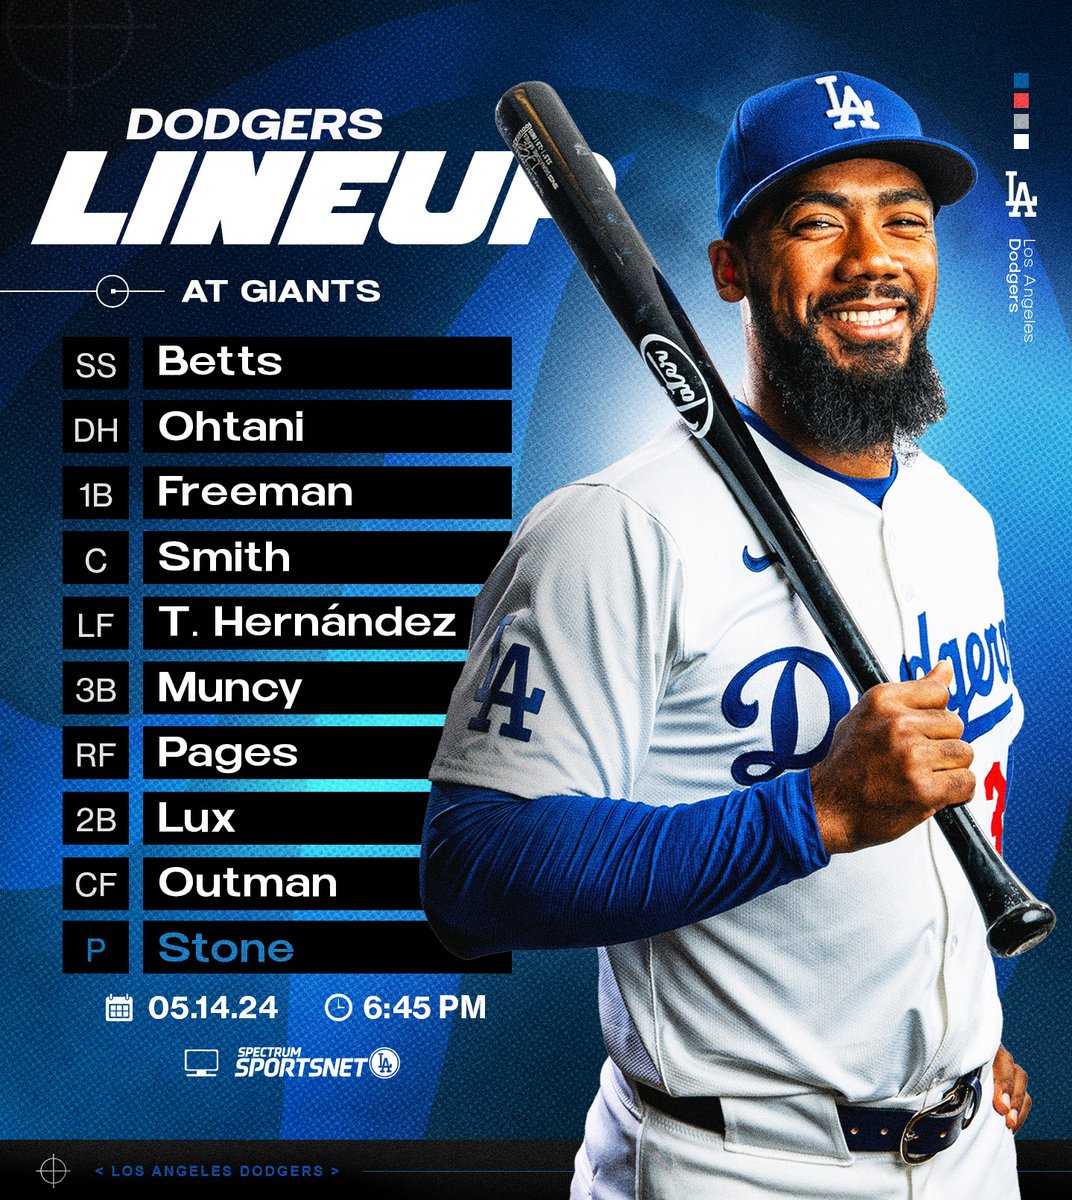 Tonight's #Dodgers lineup at Giants: